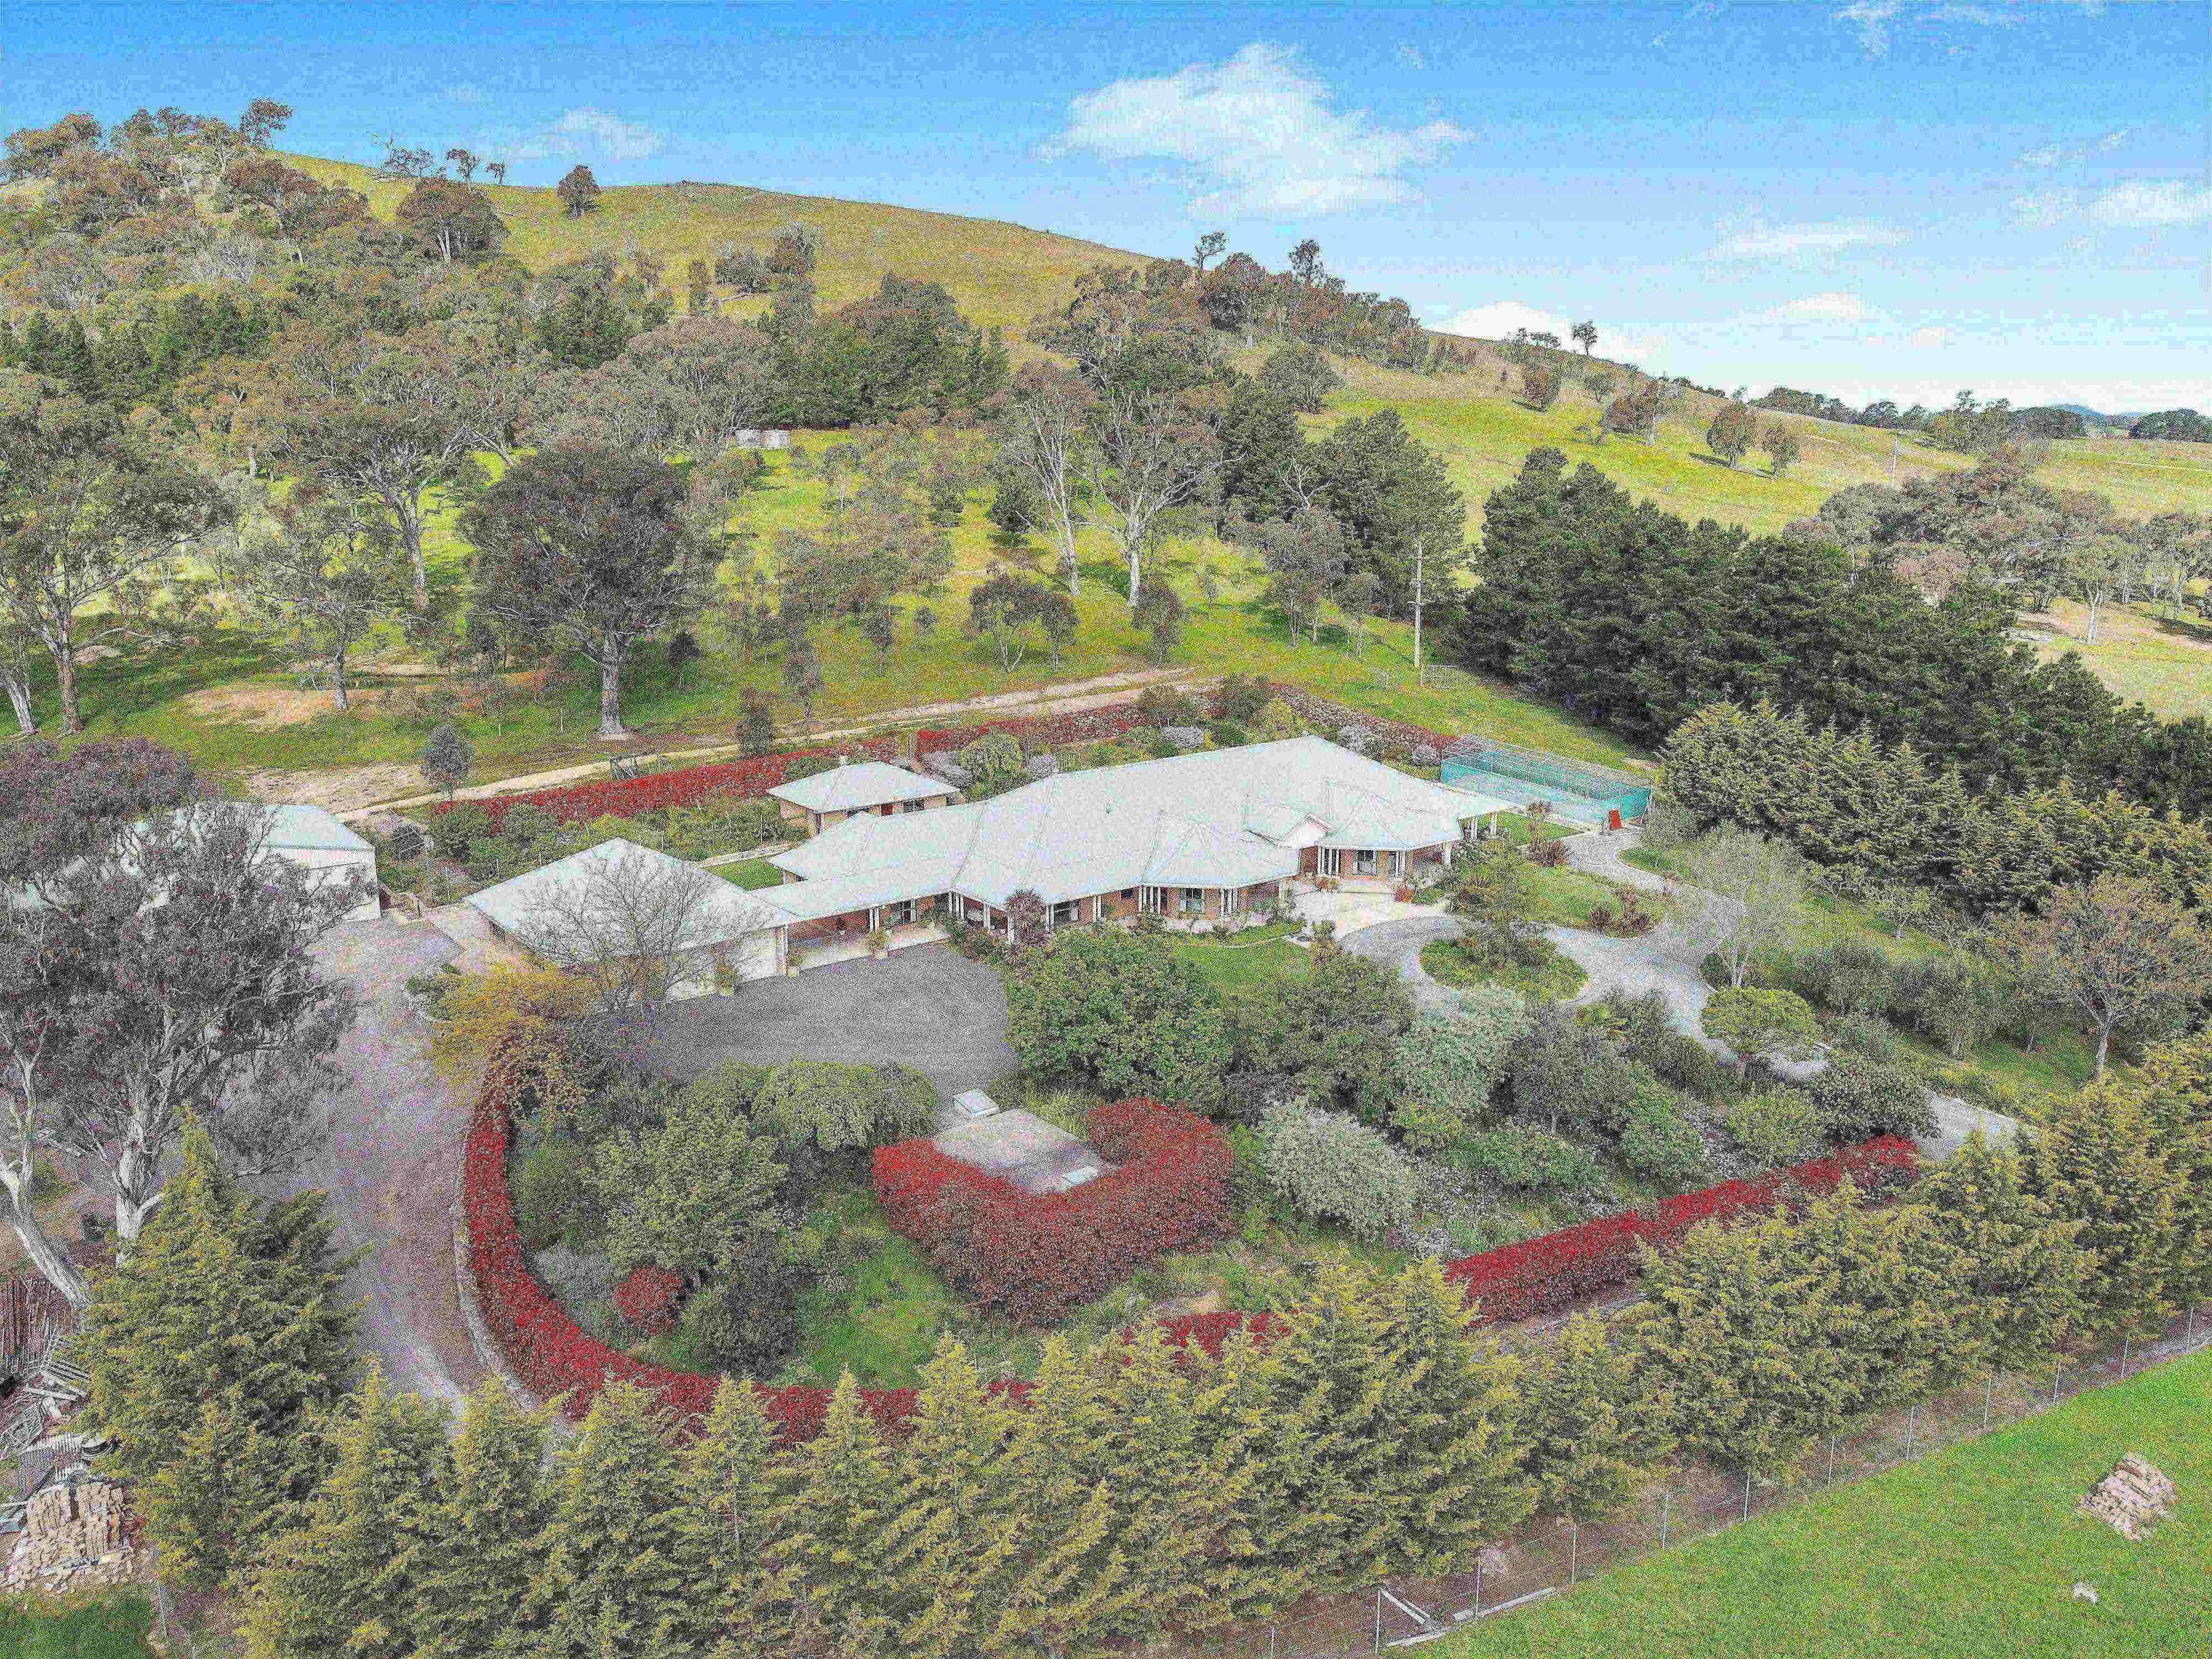 Spectacular Springrange homestead hits the market for the first time